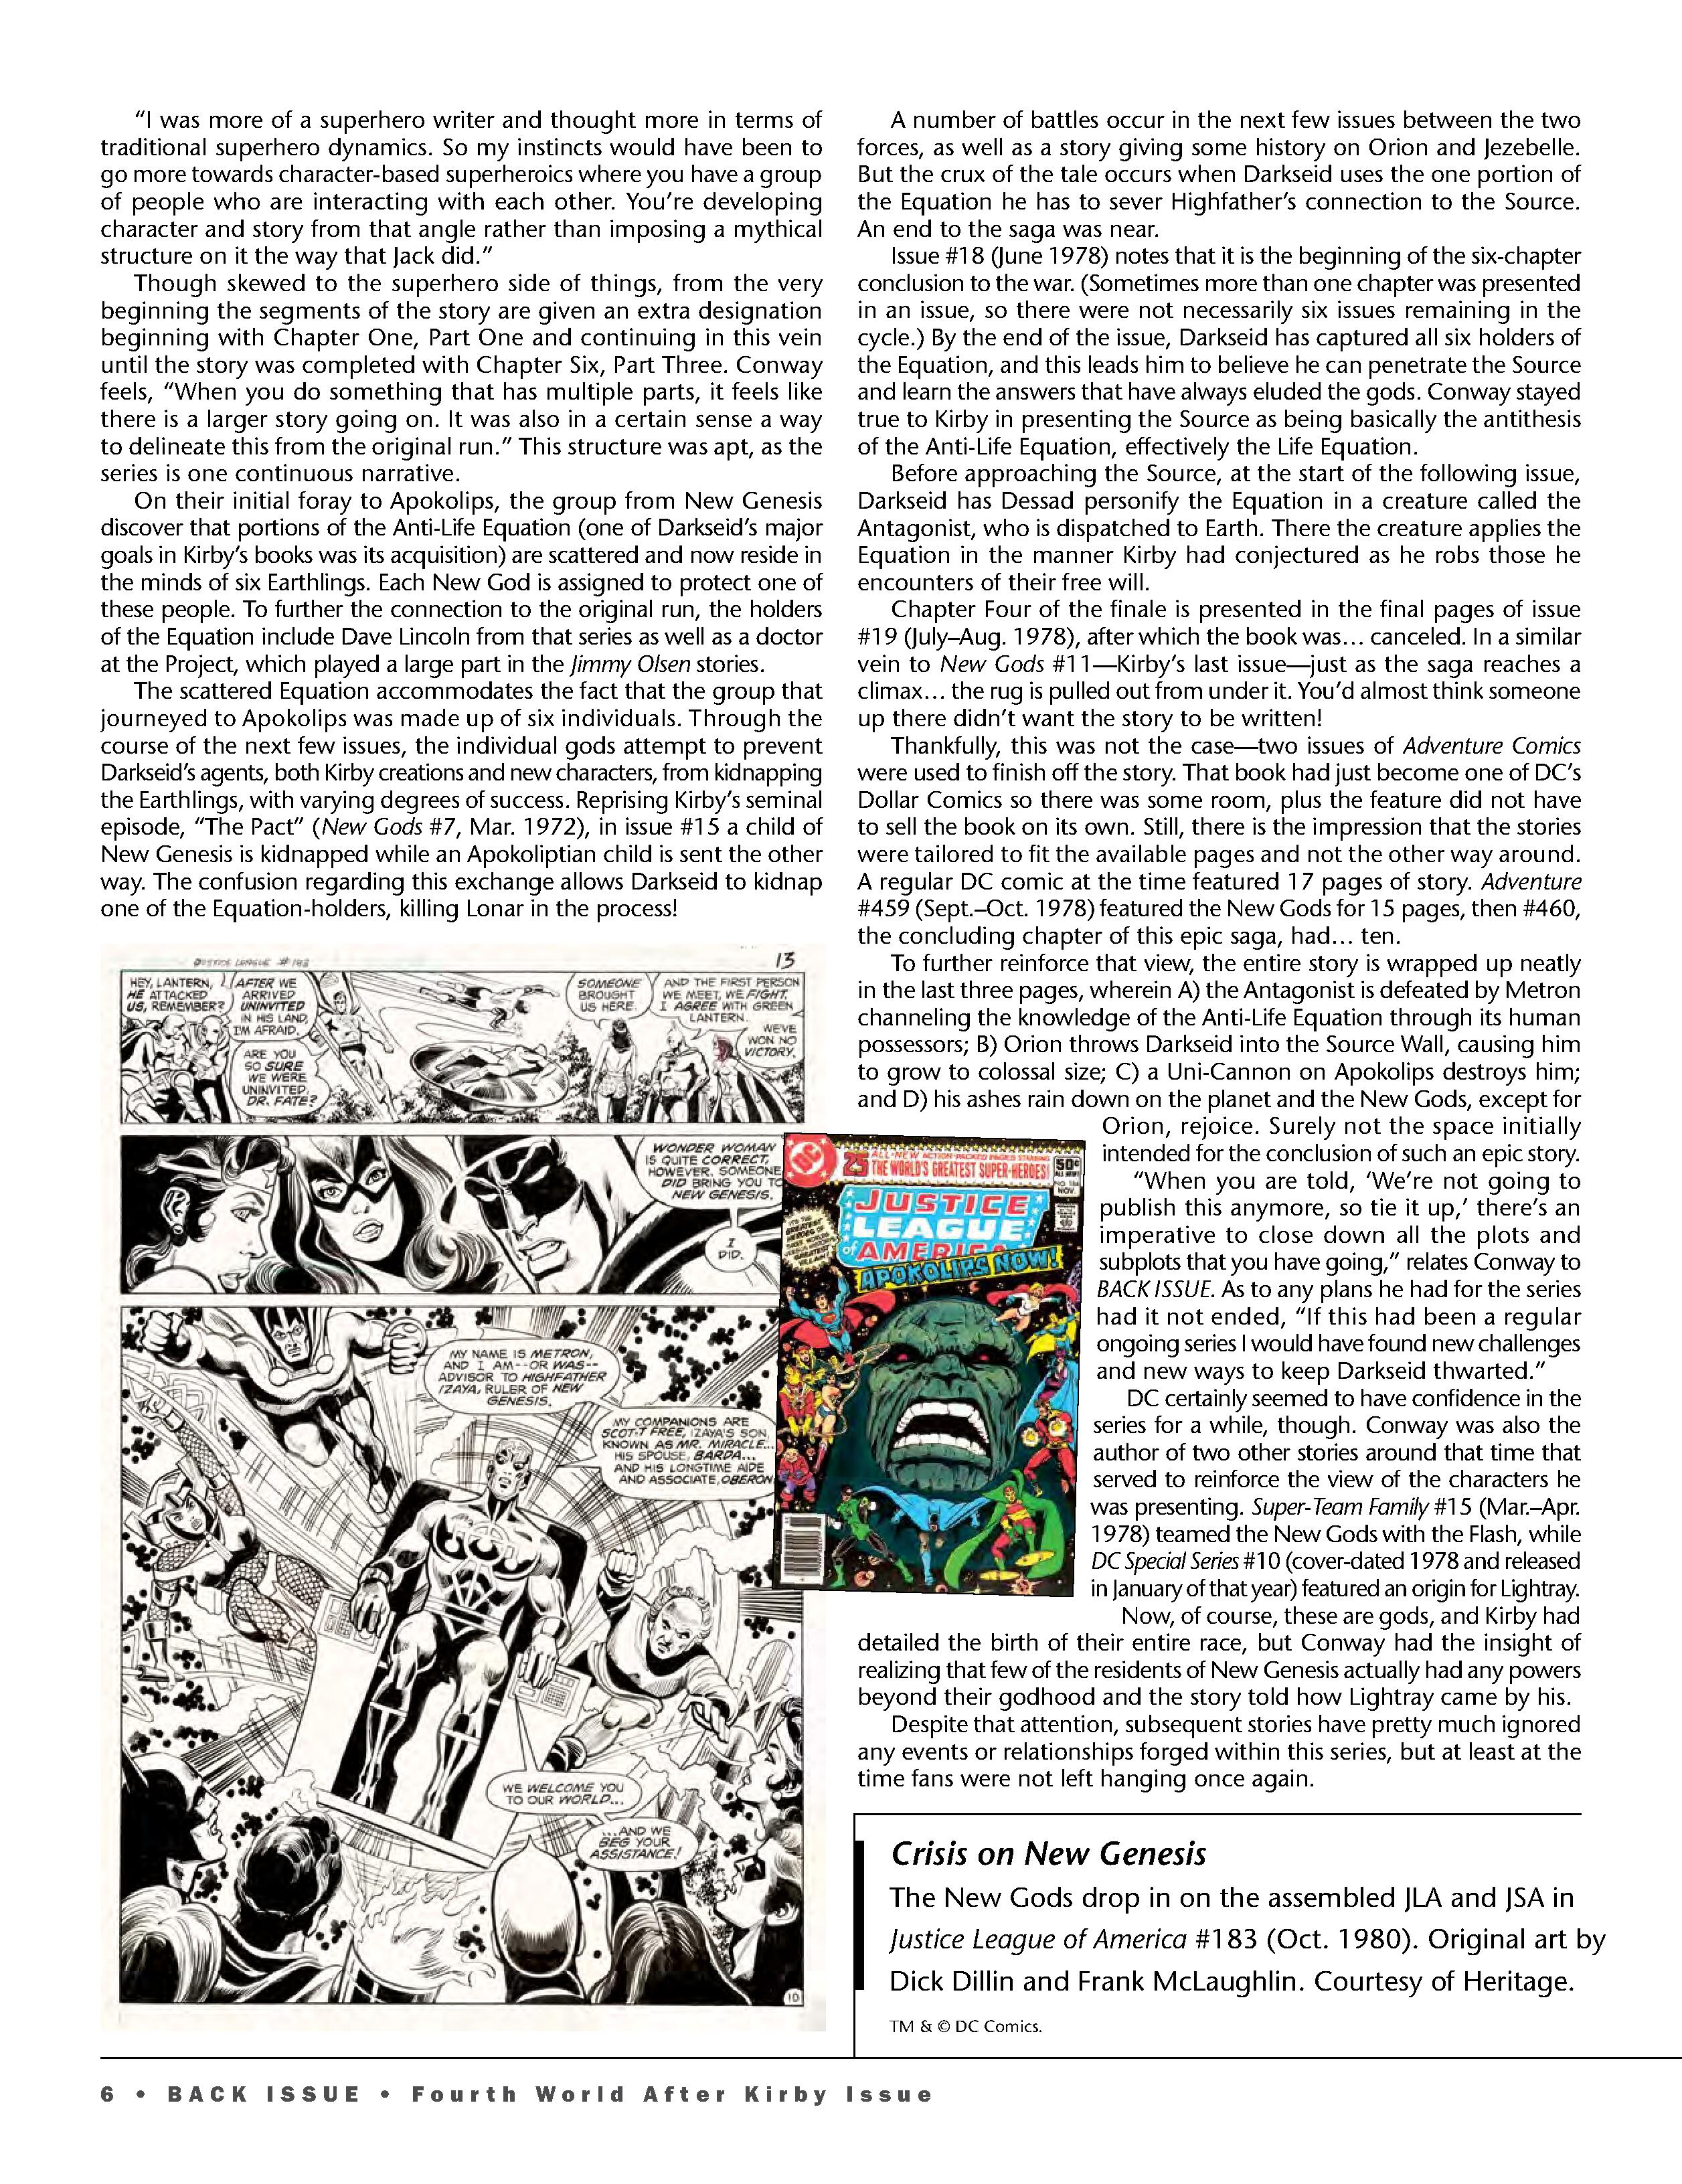 Read online Back Issue comic -  Issue #104 - 8